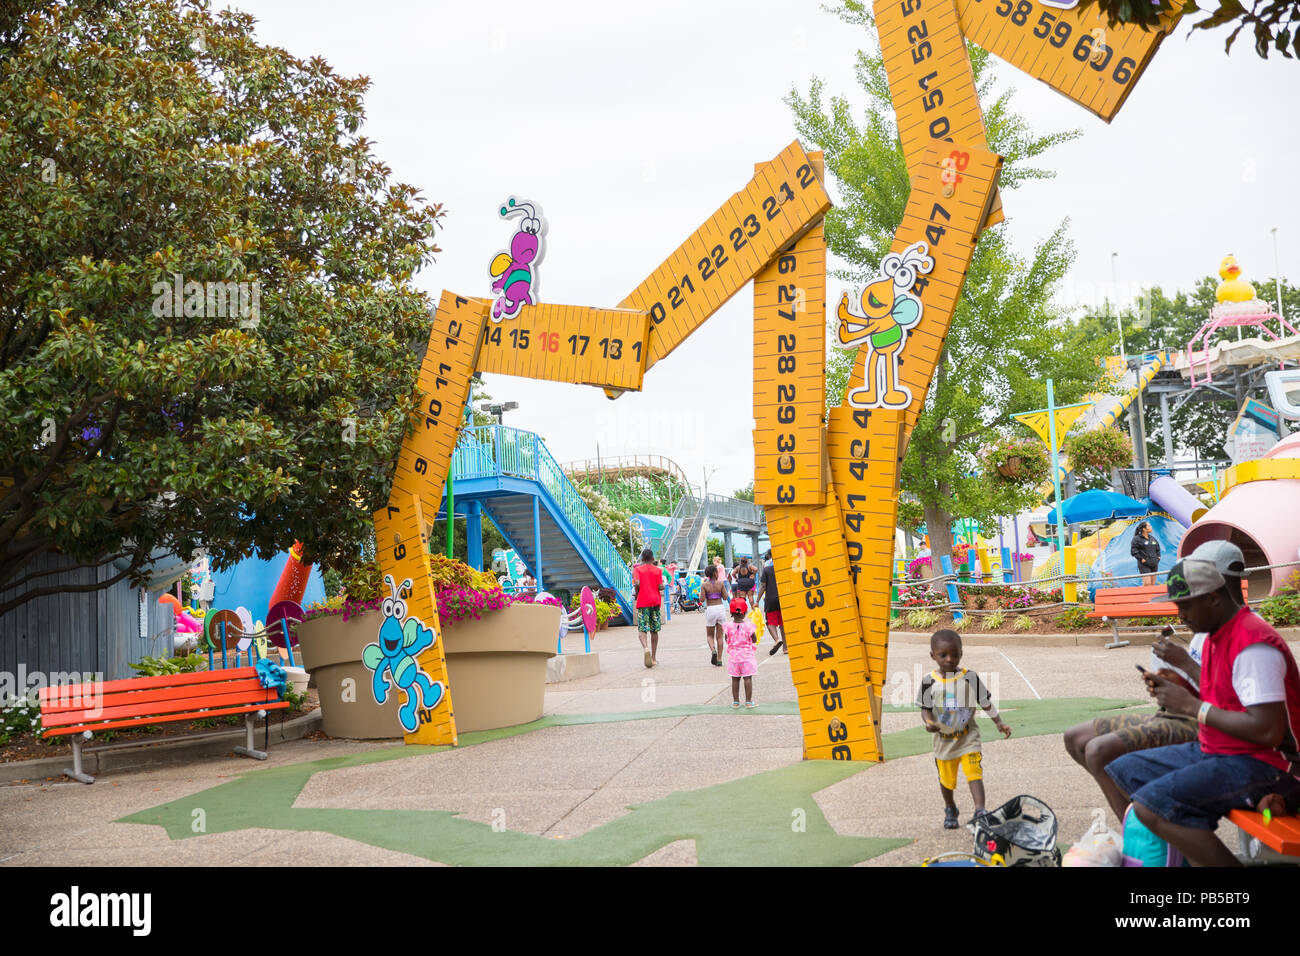 Langhorne, PA July 21, 2018: Sesame Place is a children's theme park, located on the outskirts of Philadelphia, Pennsylvania based on the Sesame Stree Stock Photo